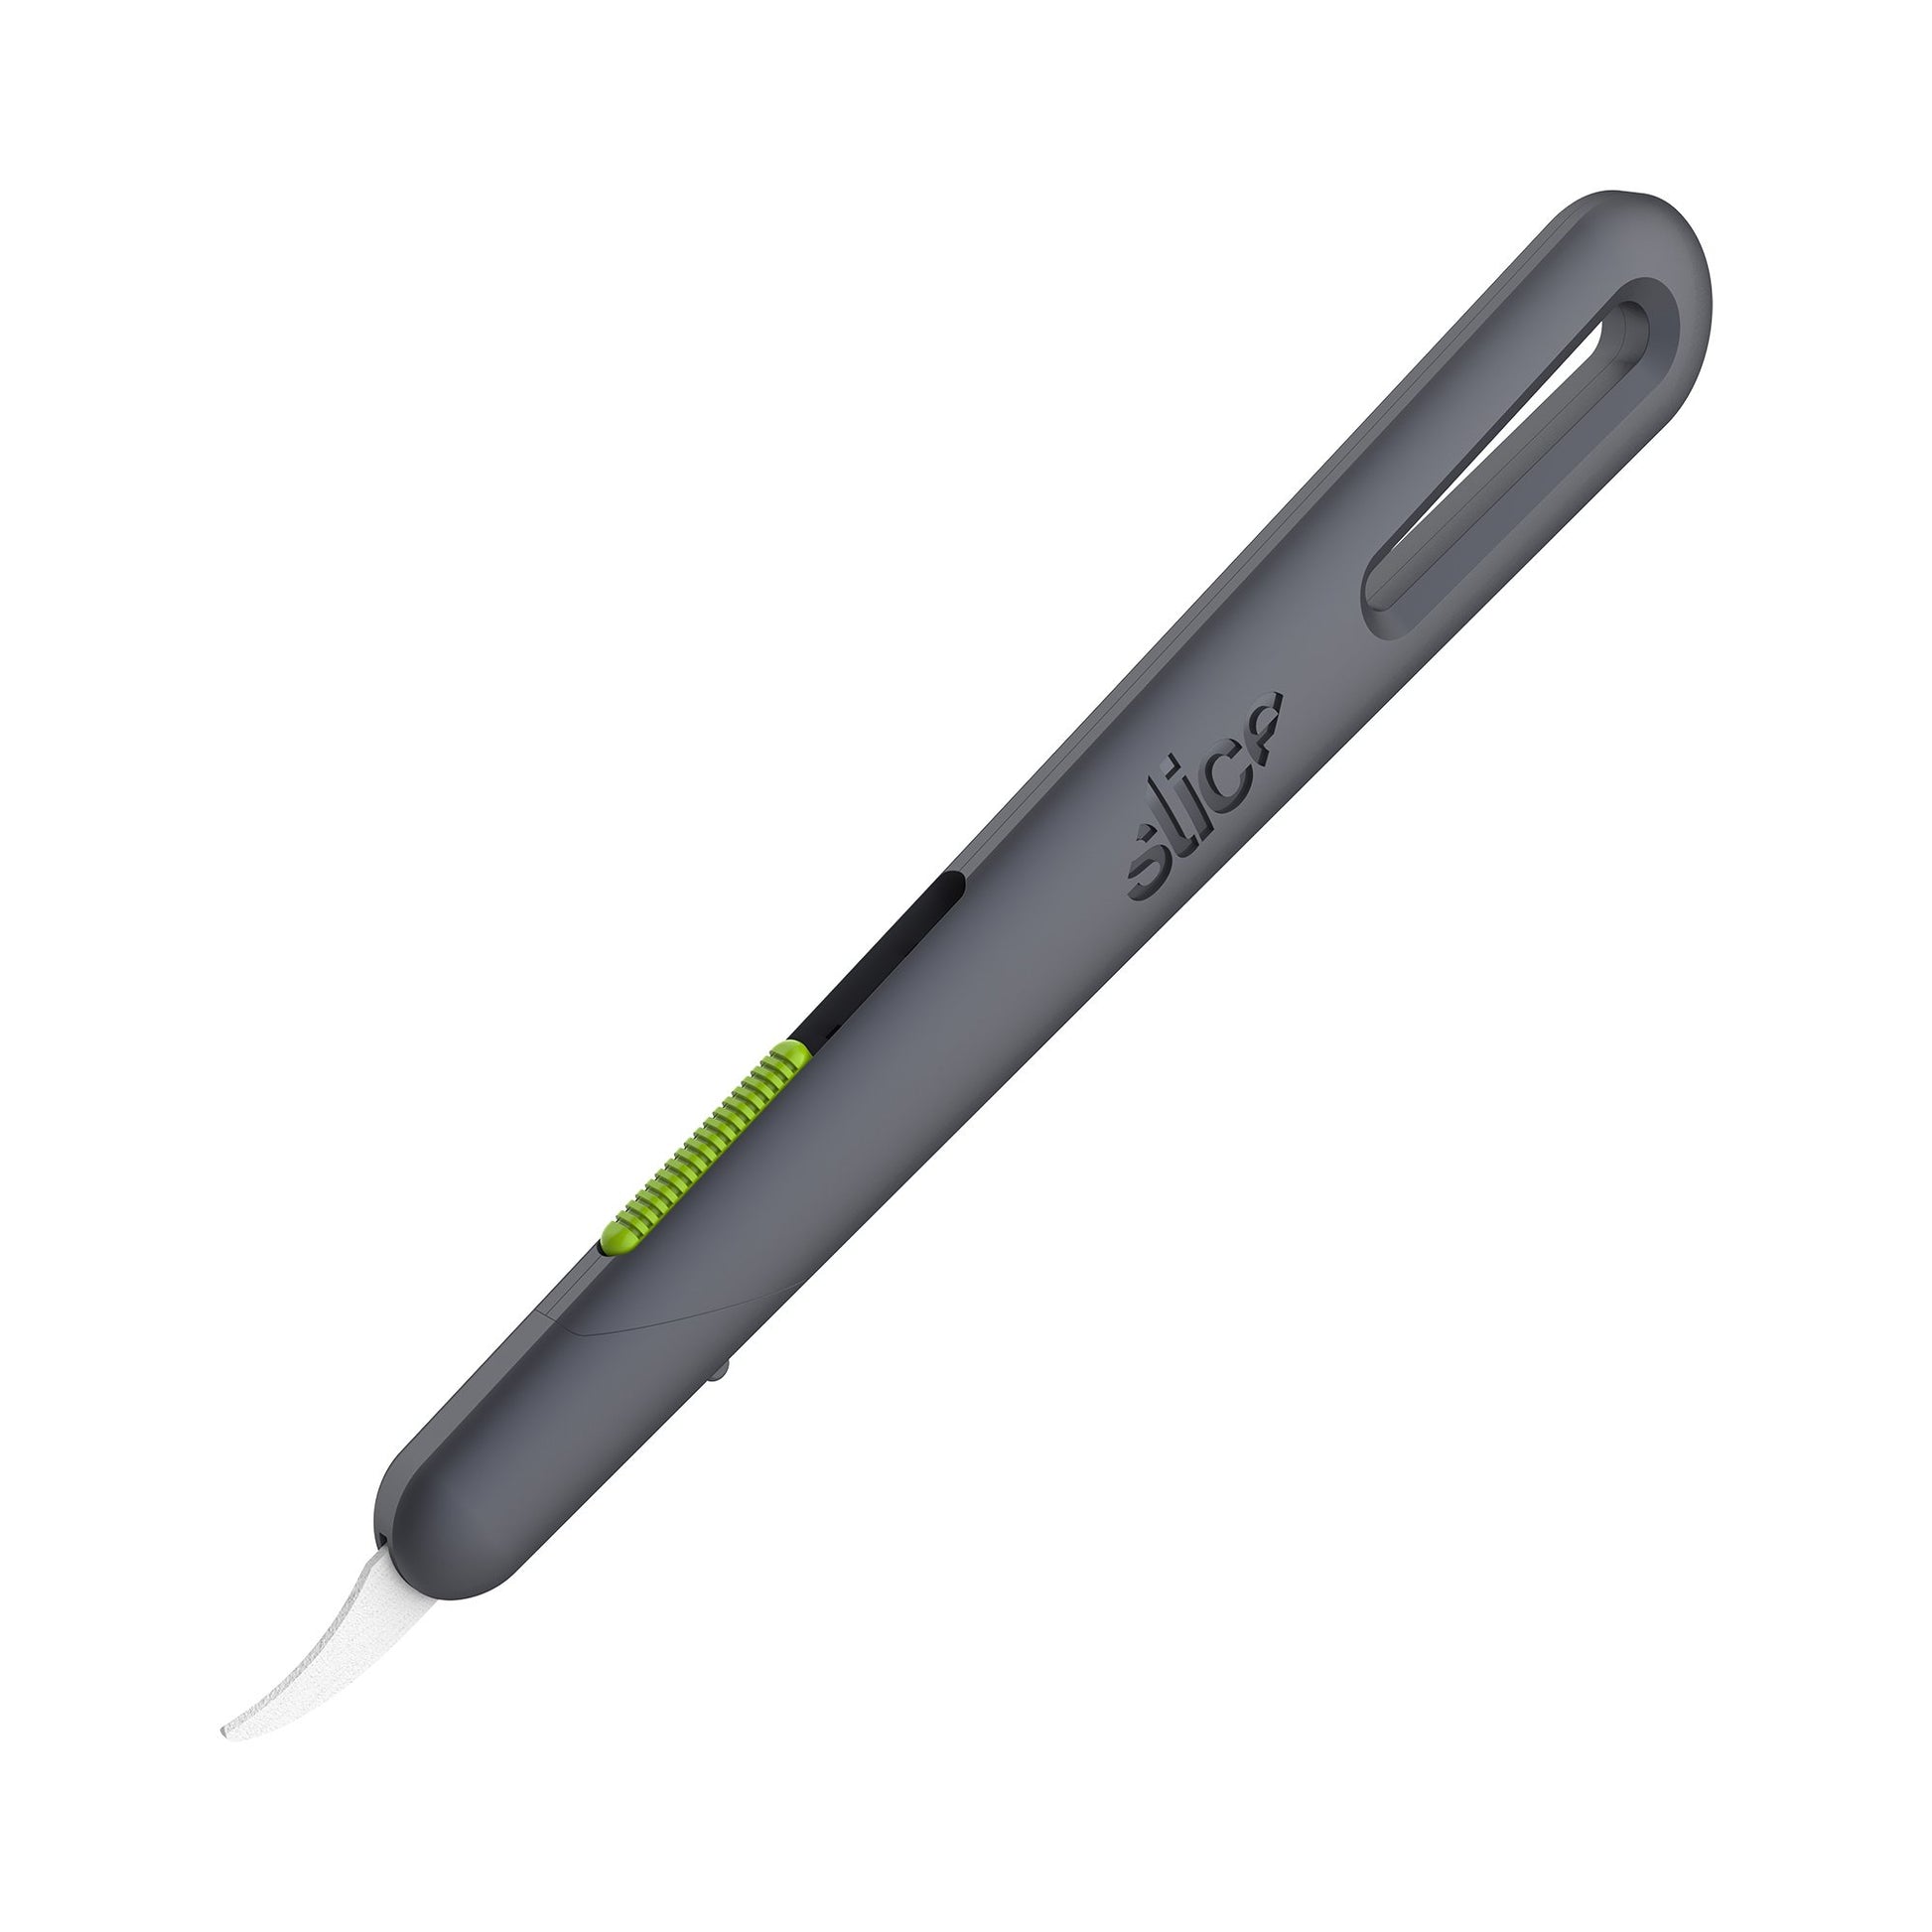 Retractable Seam Ripper and Thread Cutter - Stitched Modern